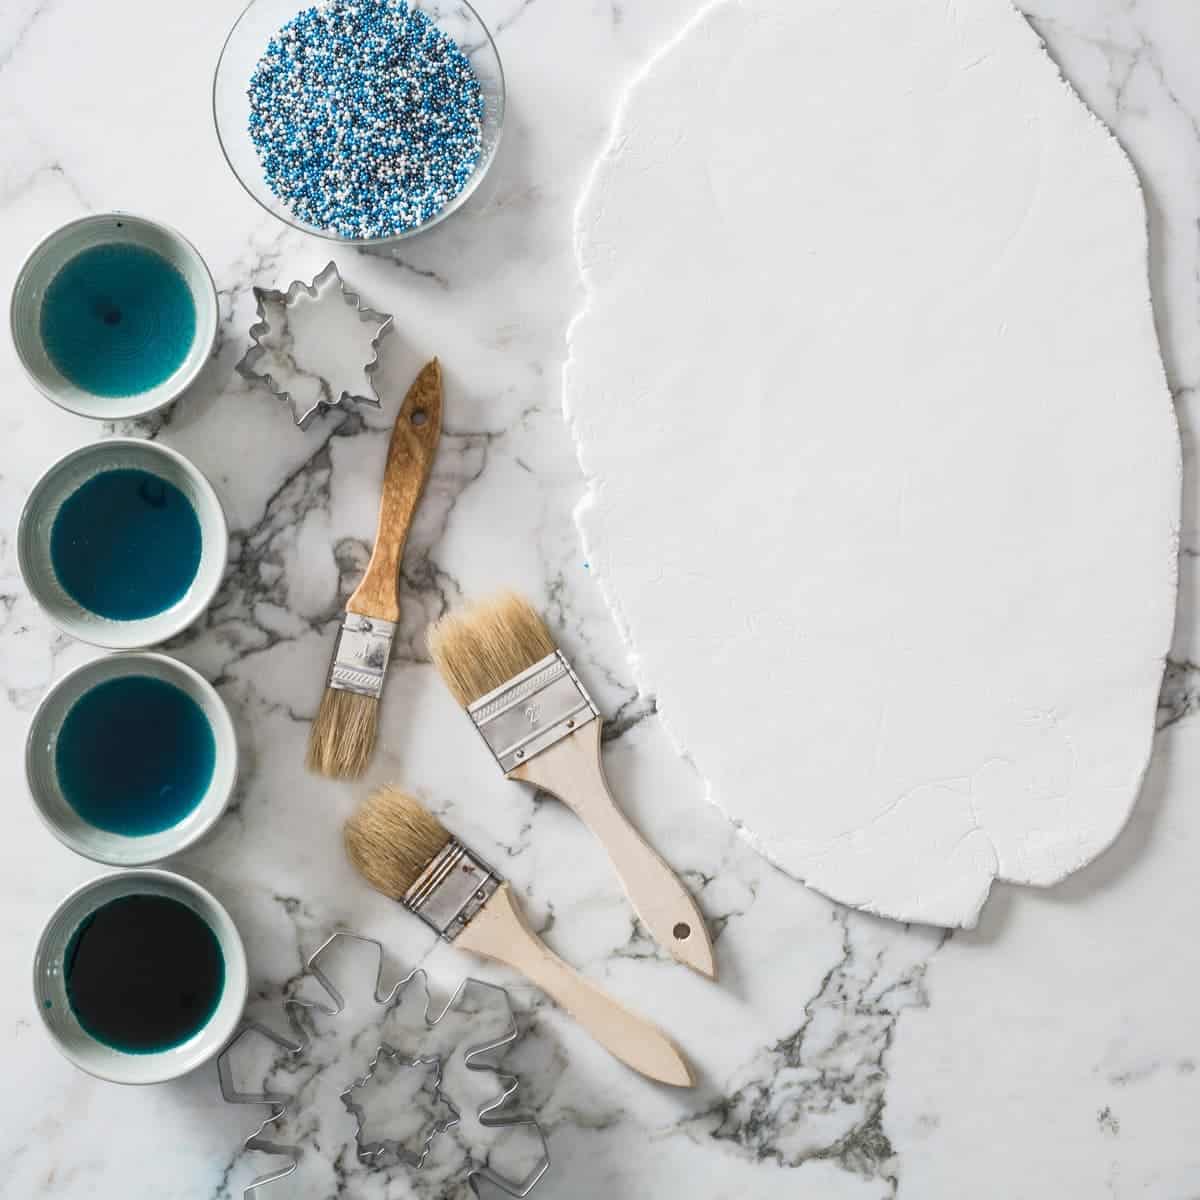 snowflake-cookie-decorating-with-toddler-jena-carlin-photography-web-3